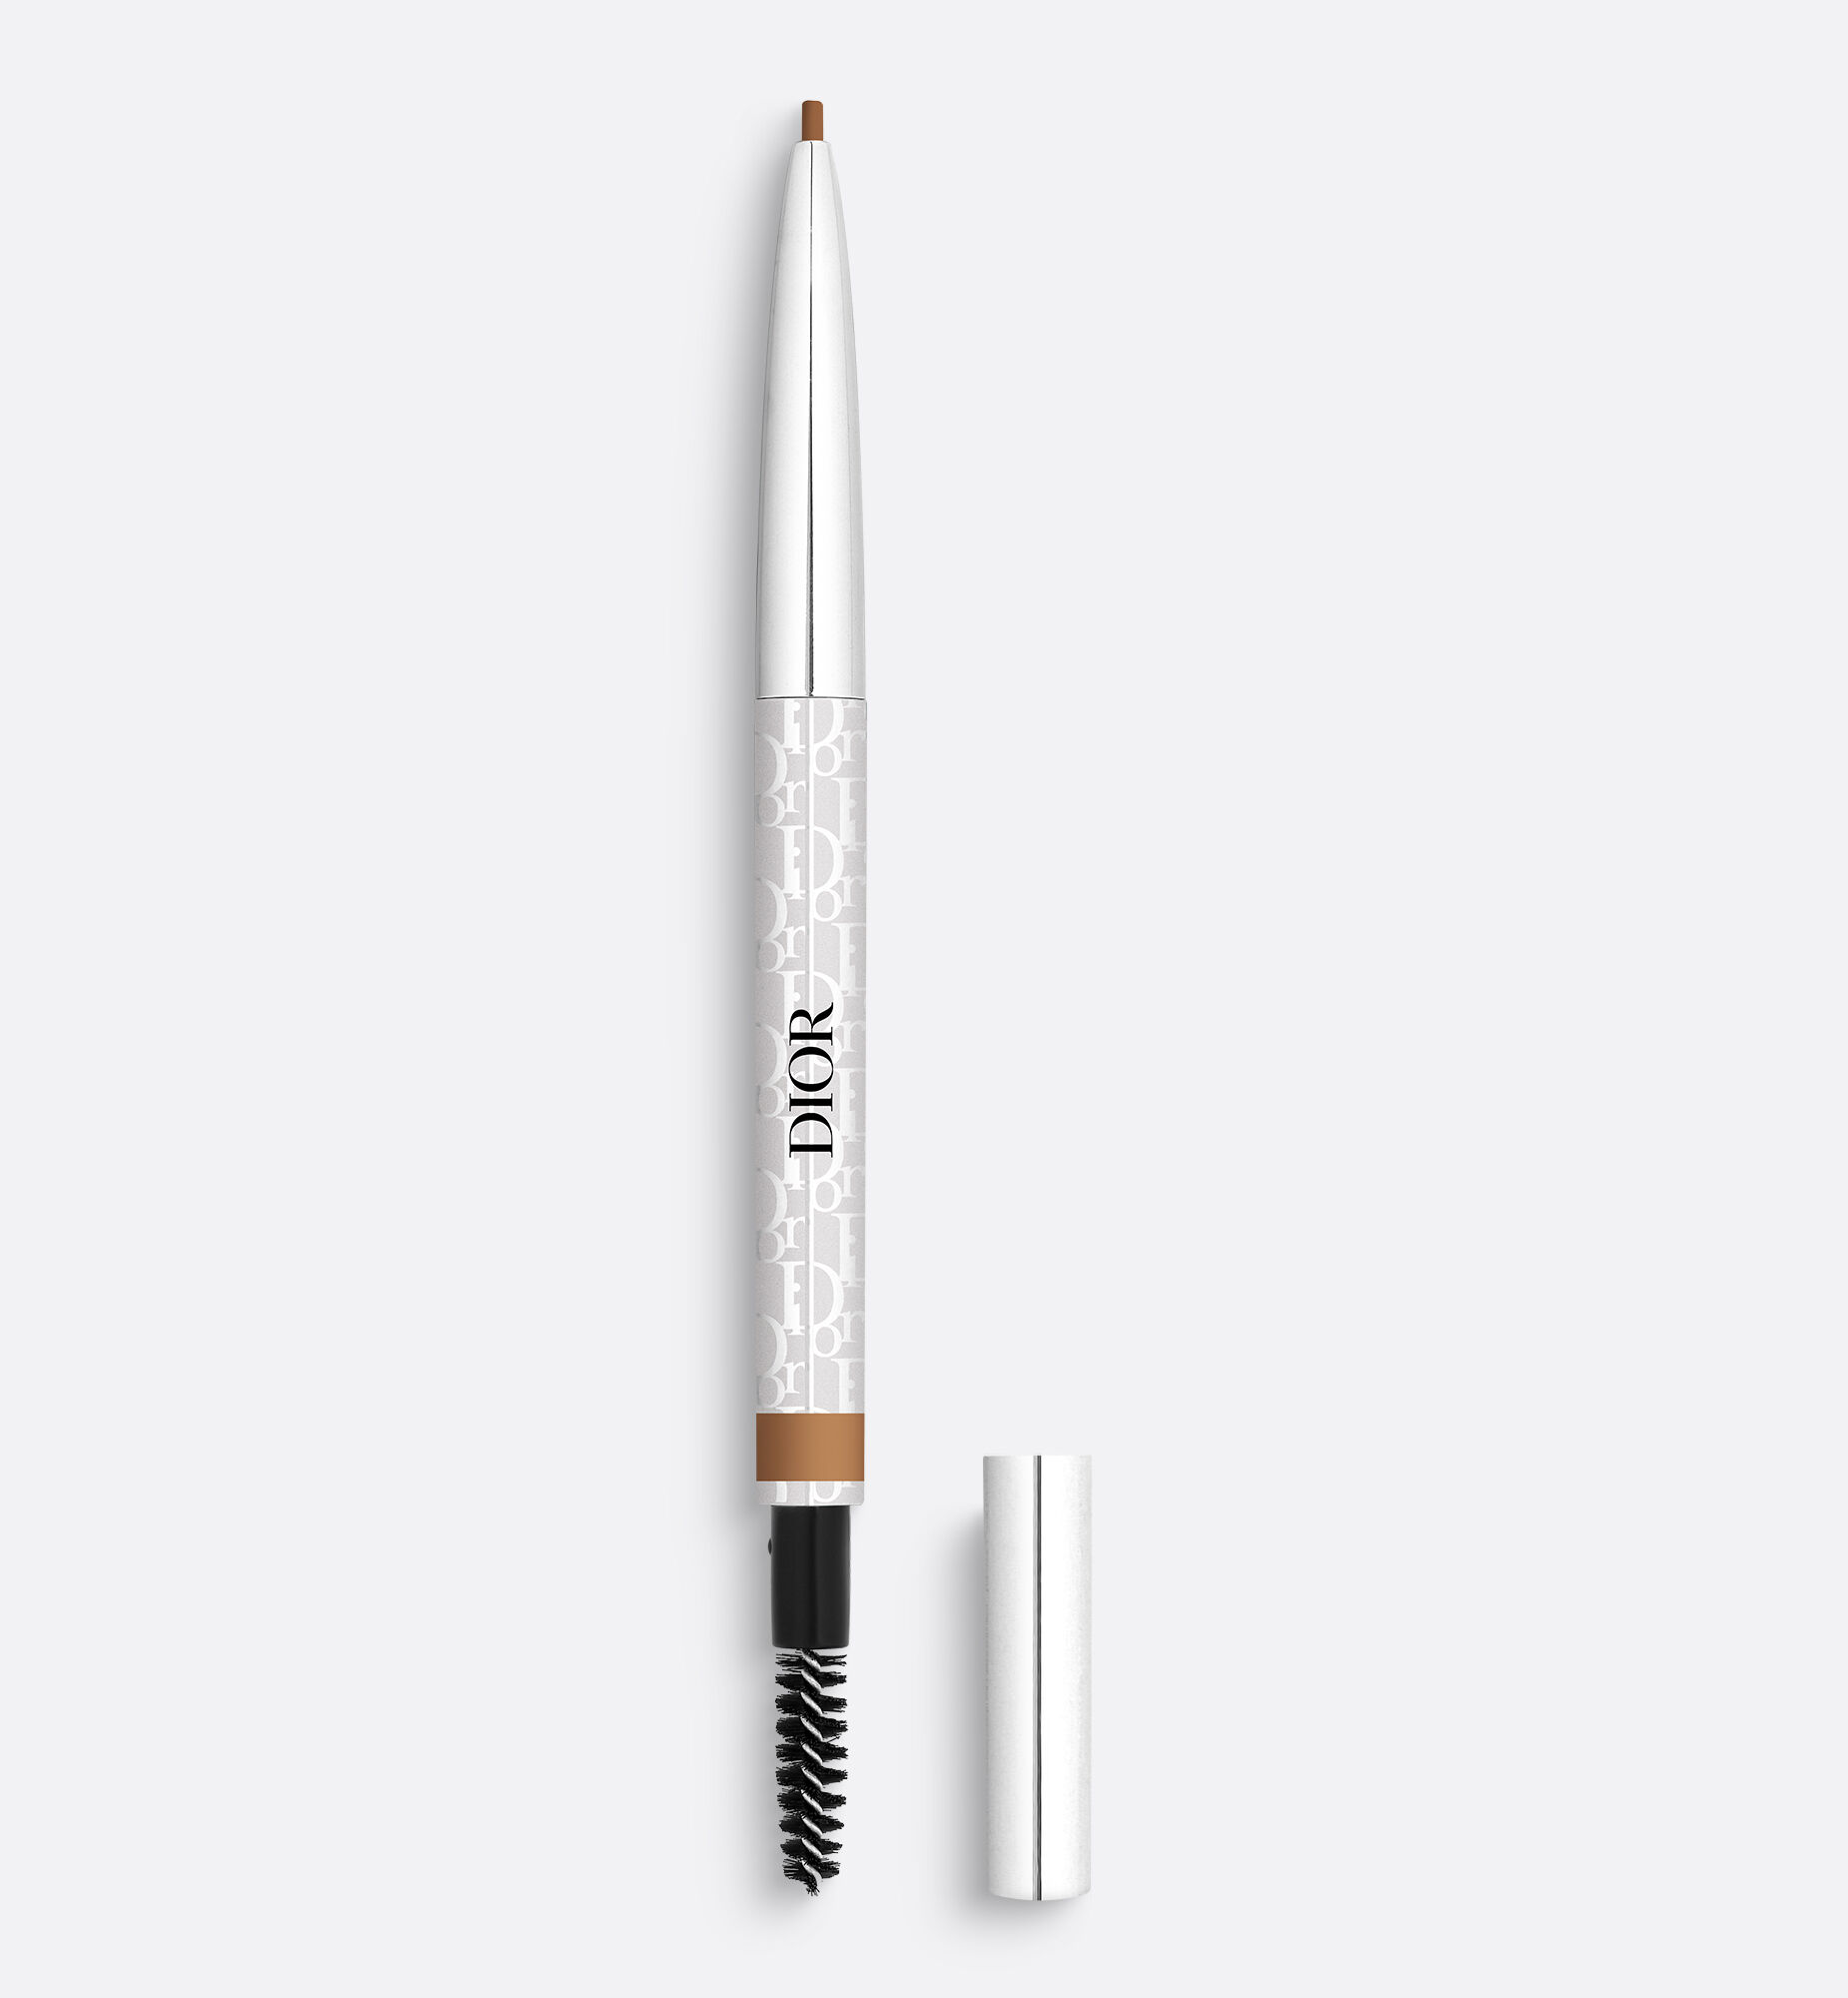 Dior Diorshow Brow Styler UltraFine Precision Brow Pencil in 002  Universal Dark Brown Review and Swatches  The Happy Sloths Beauty  Makeup and Skincare Blog with Reviews and Swatches